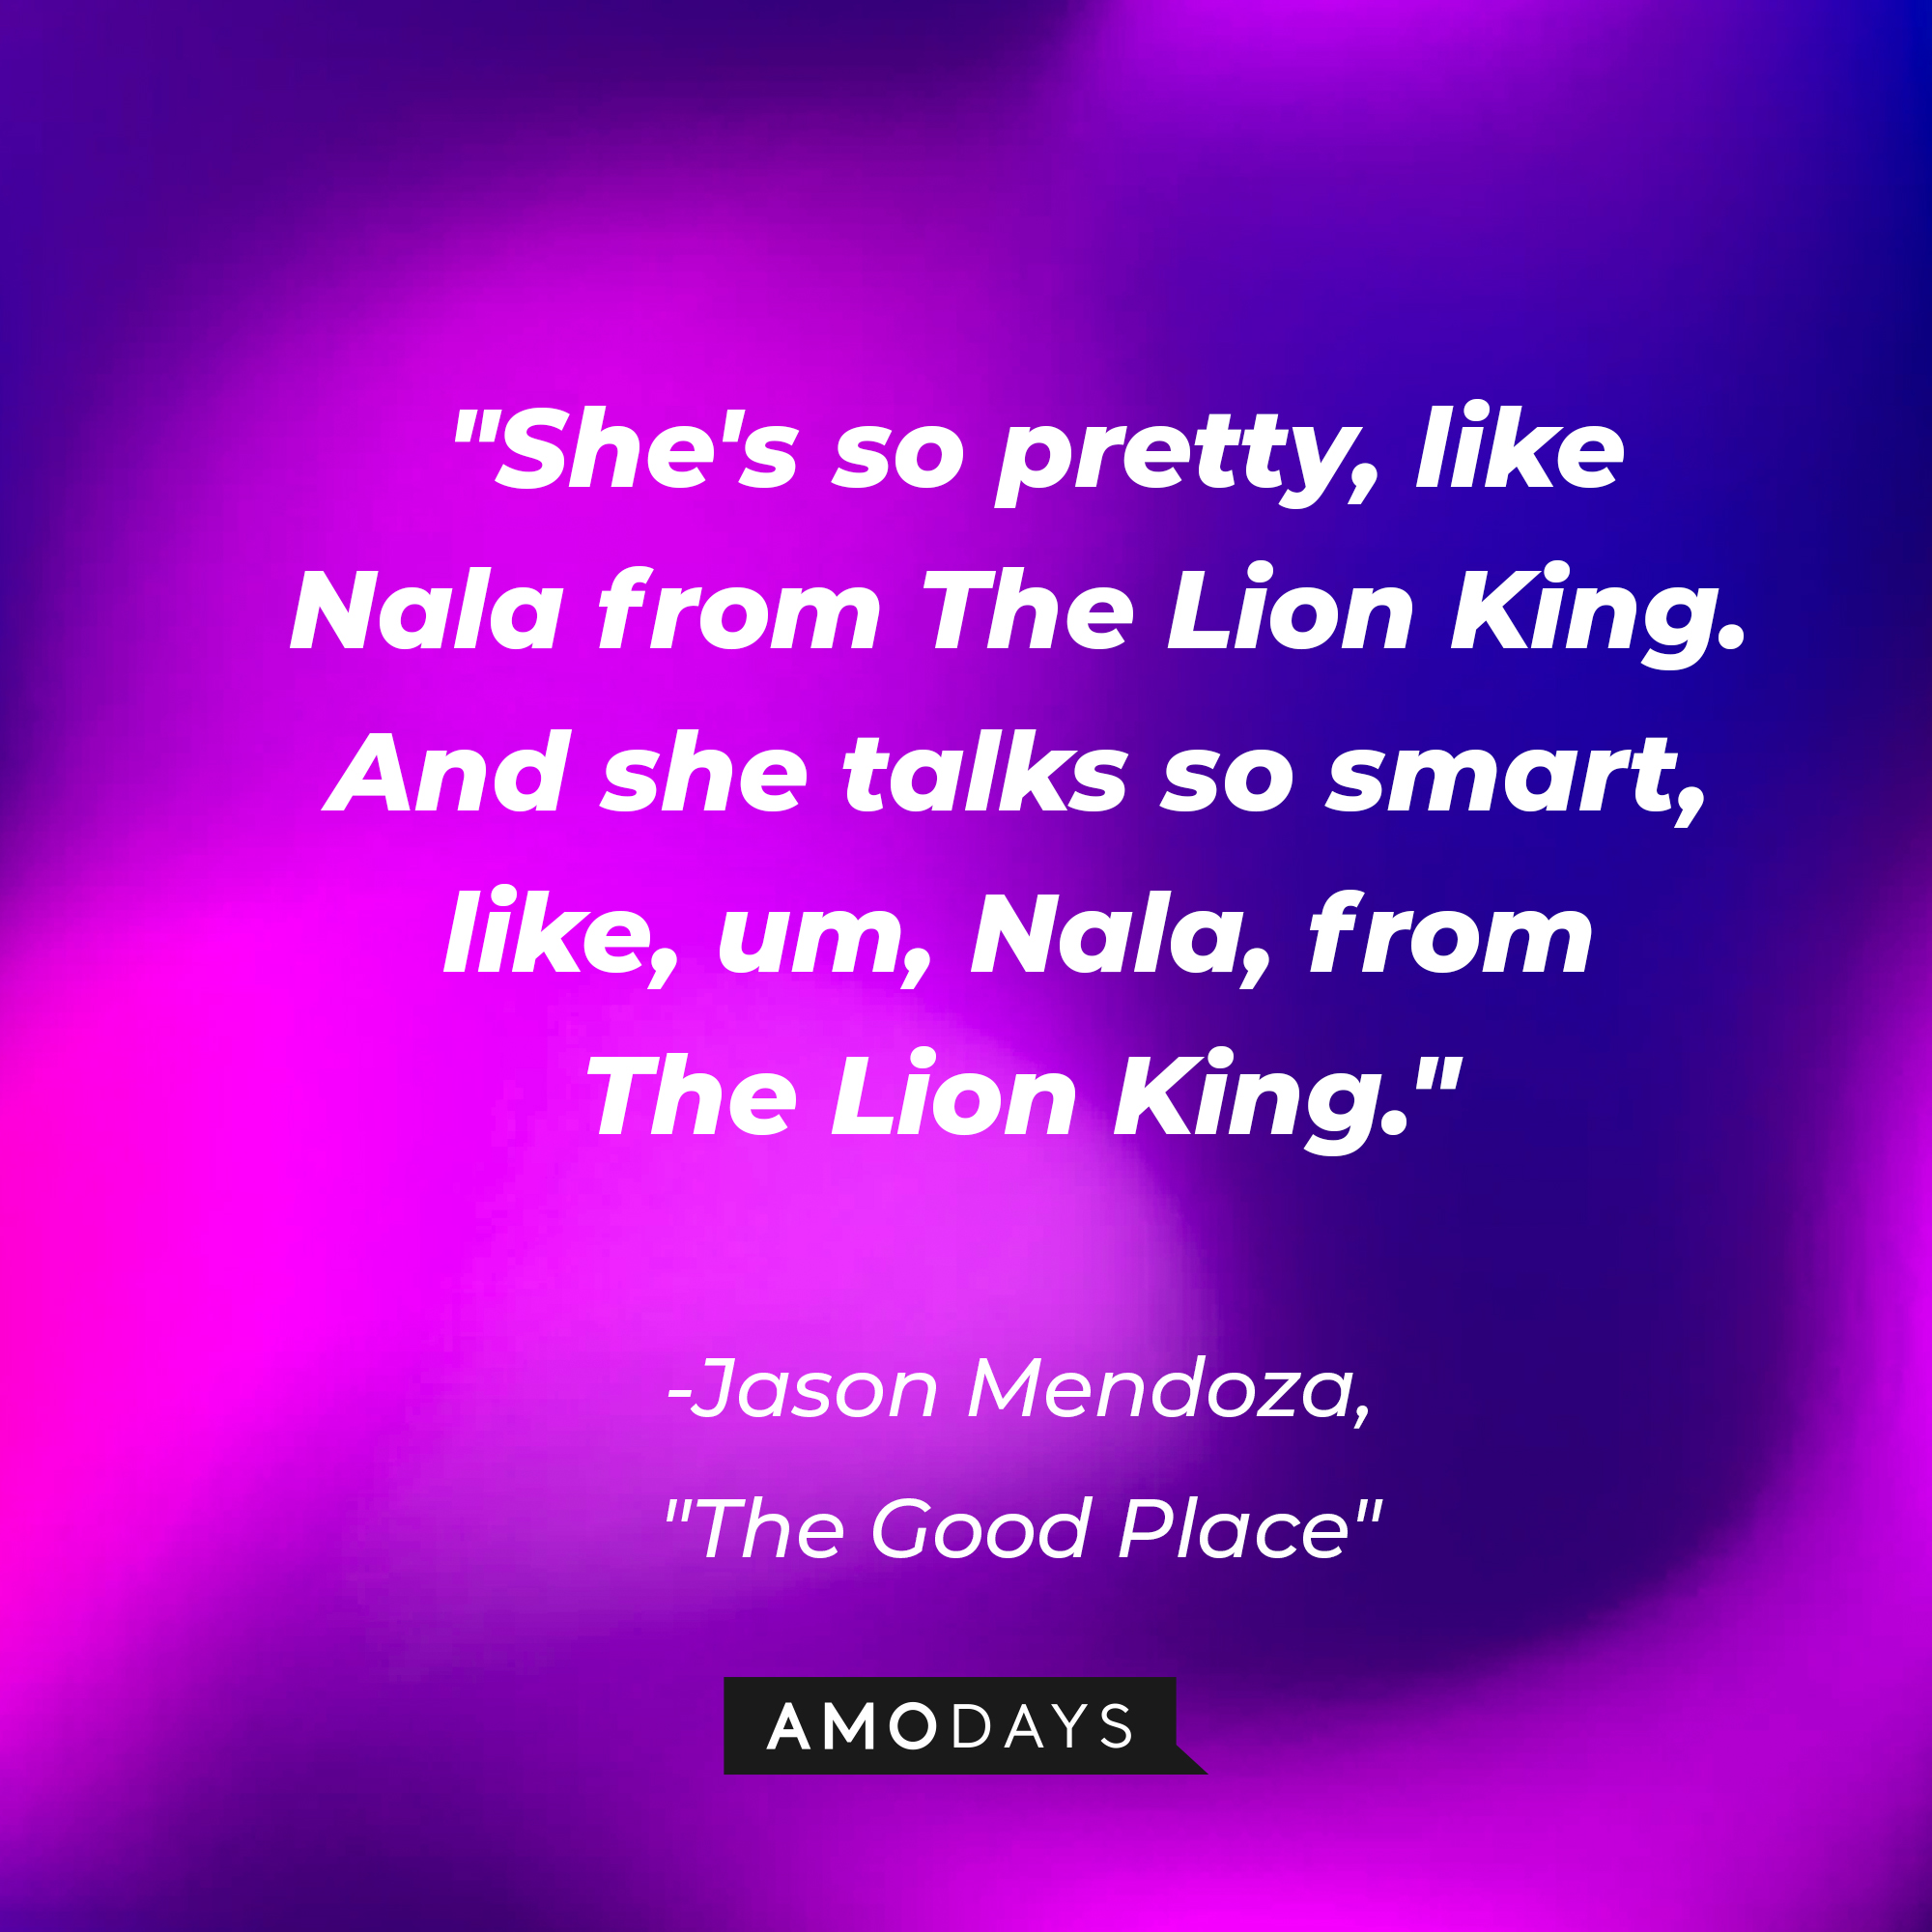 Jason Mendoza's quote in "The Good Place:" “She's so pretty, like Nala from The Lion King. And she talks so smart, like, um, Nala, from The Lion King.” | Source: Amodays